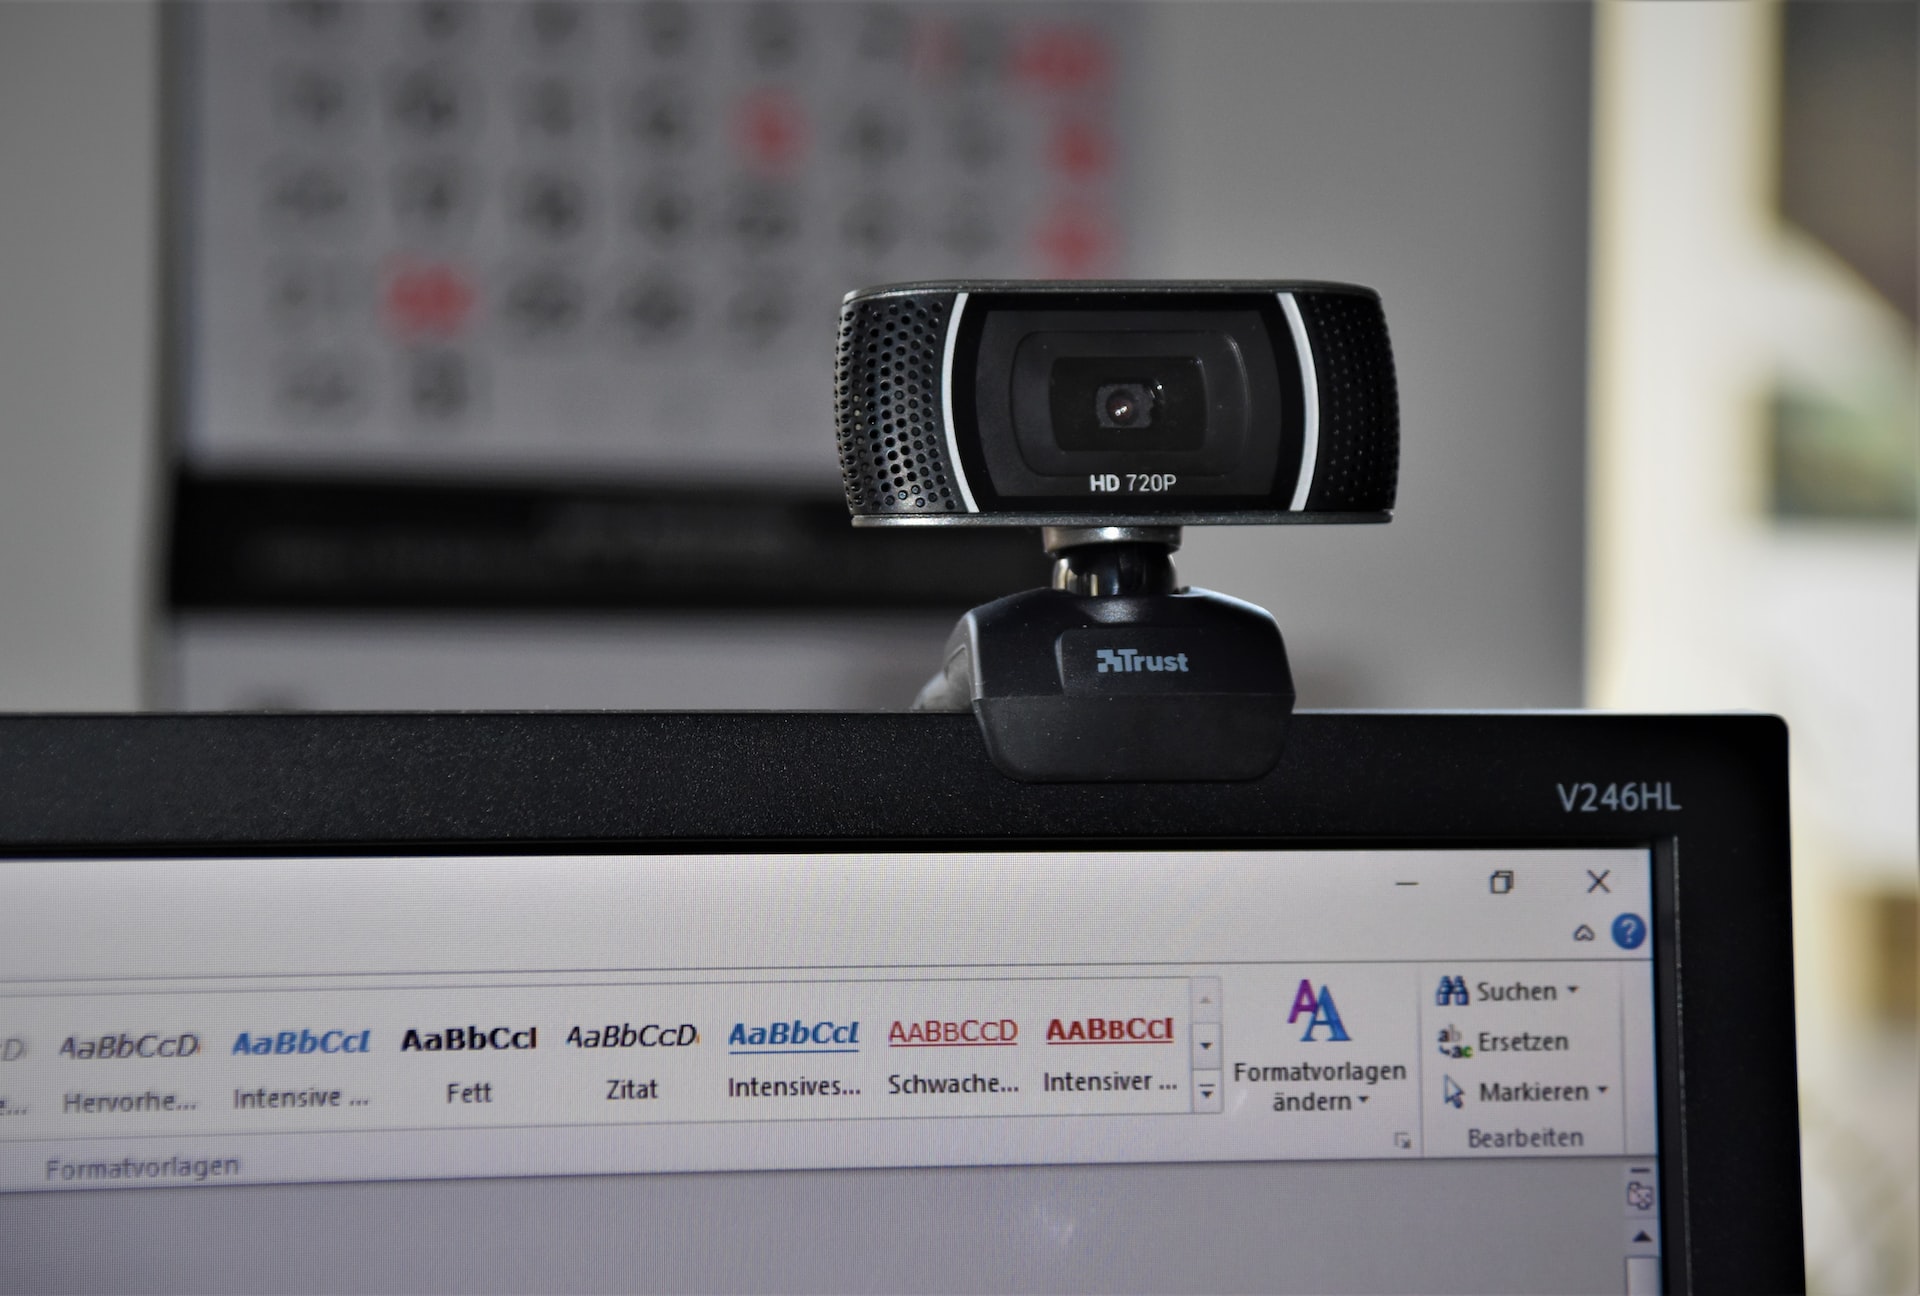 Know these pointers before you buy a webcam